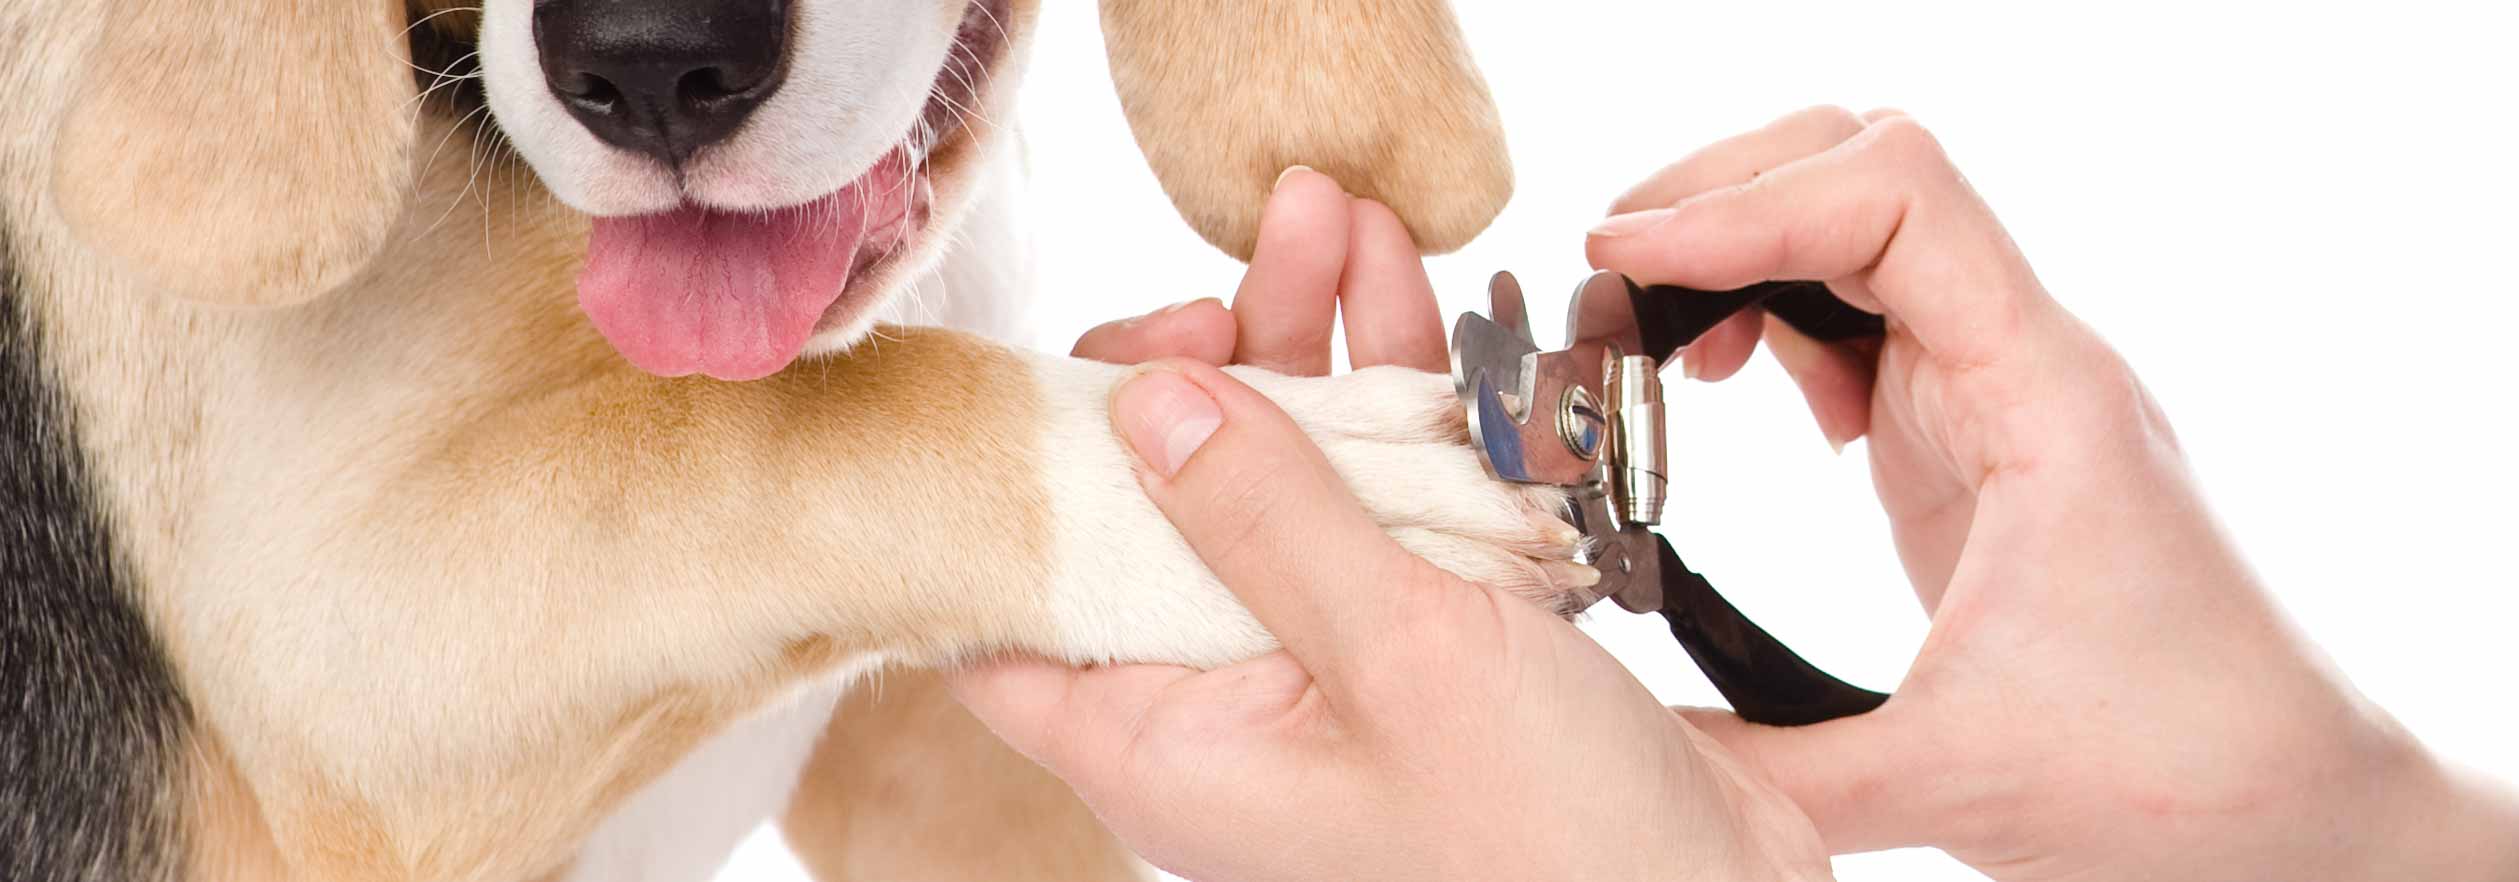 How to identify where my dog's quick is if it has black nails - Quora